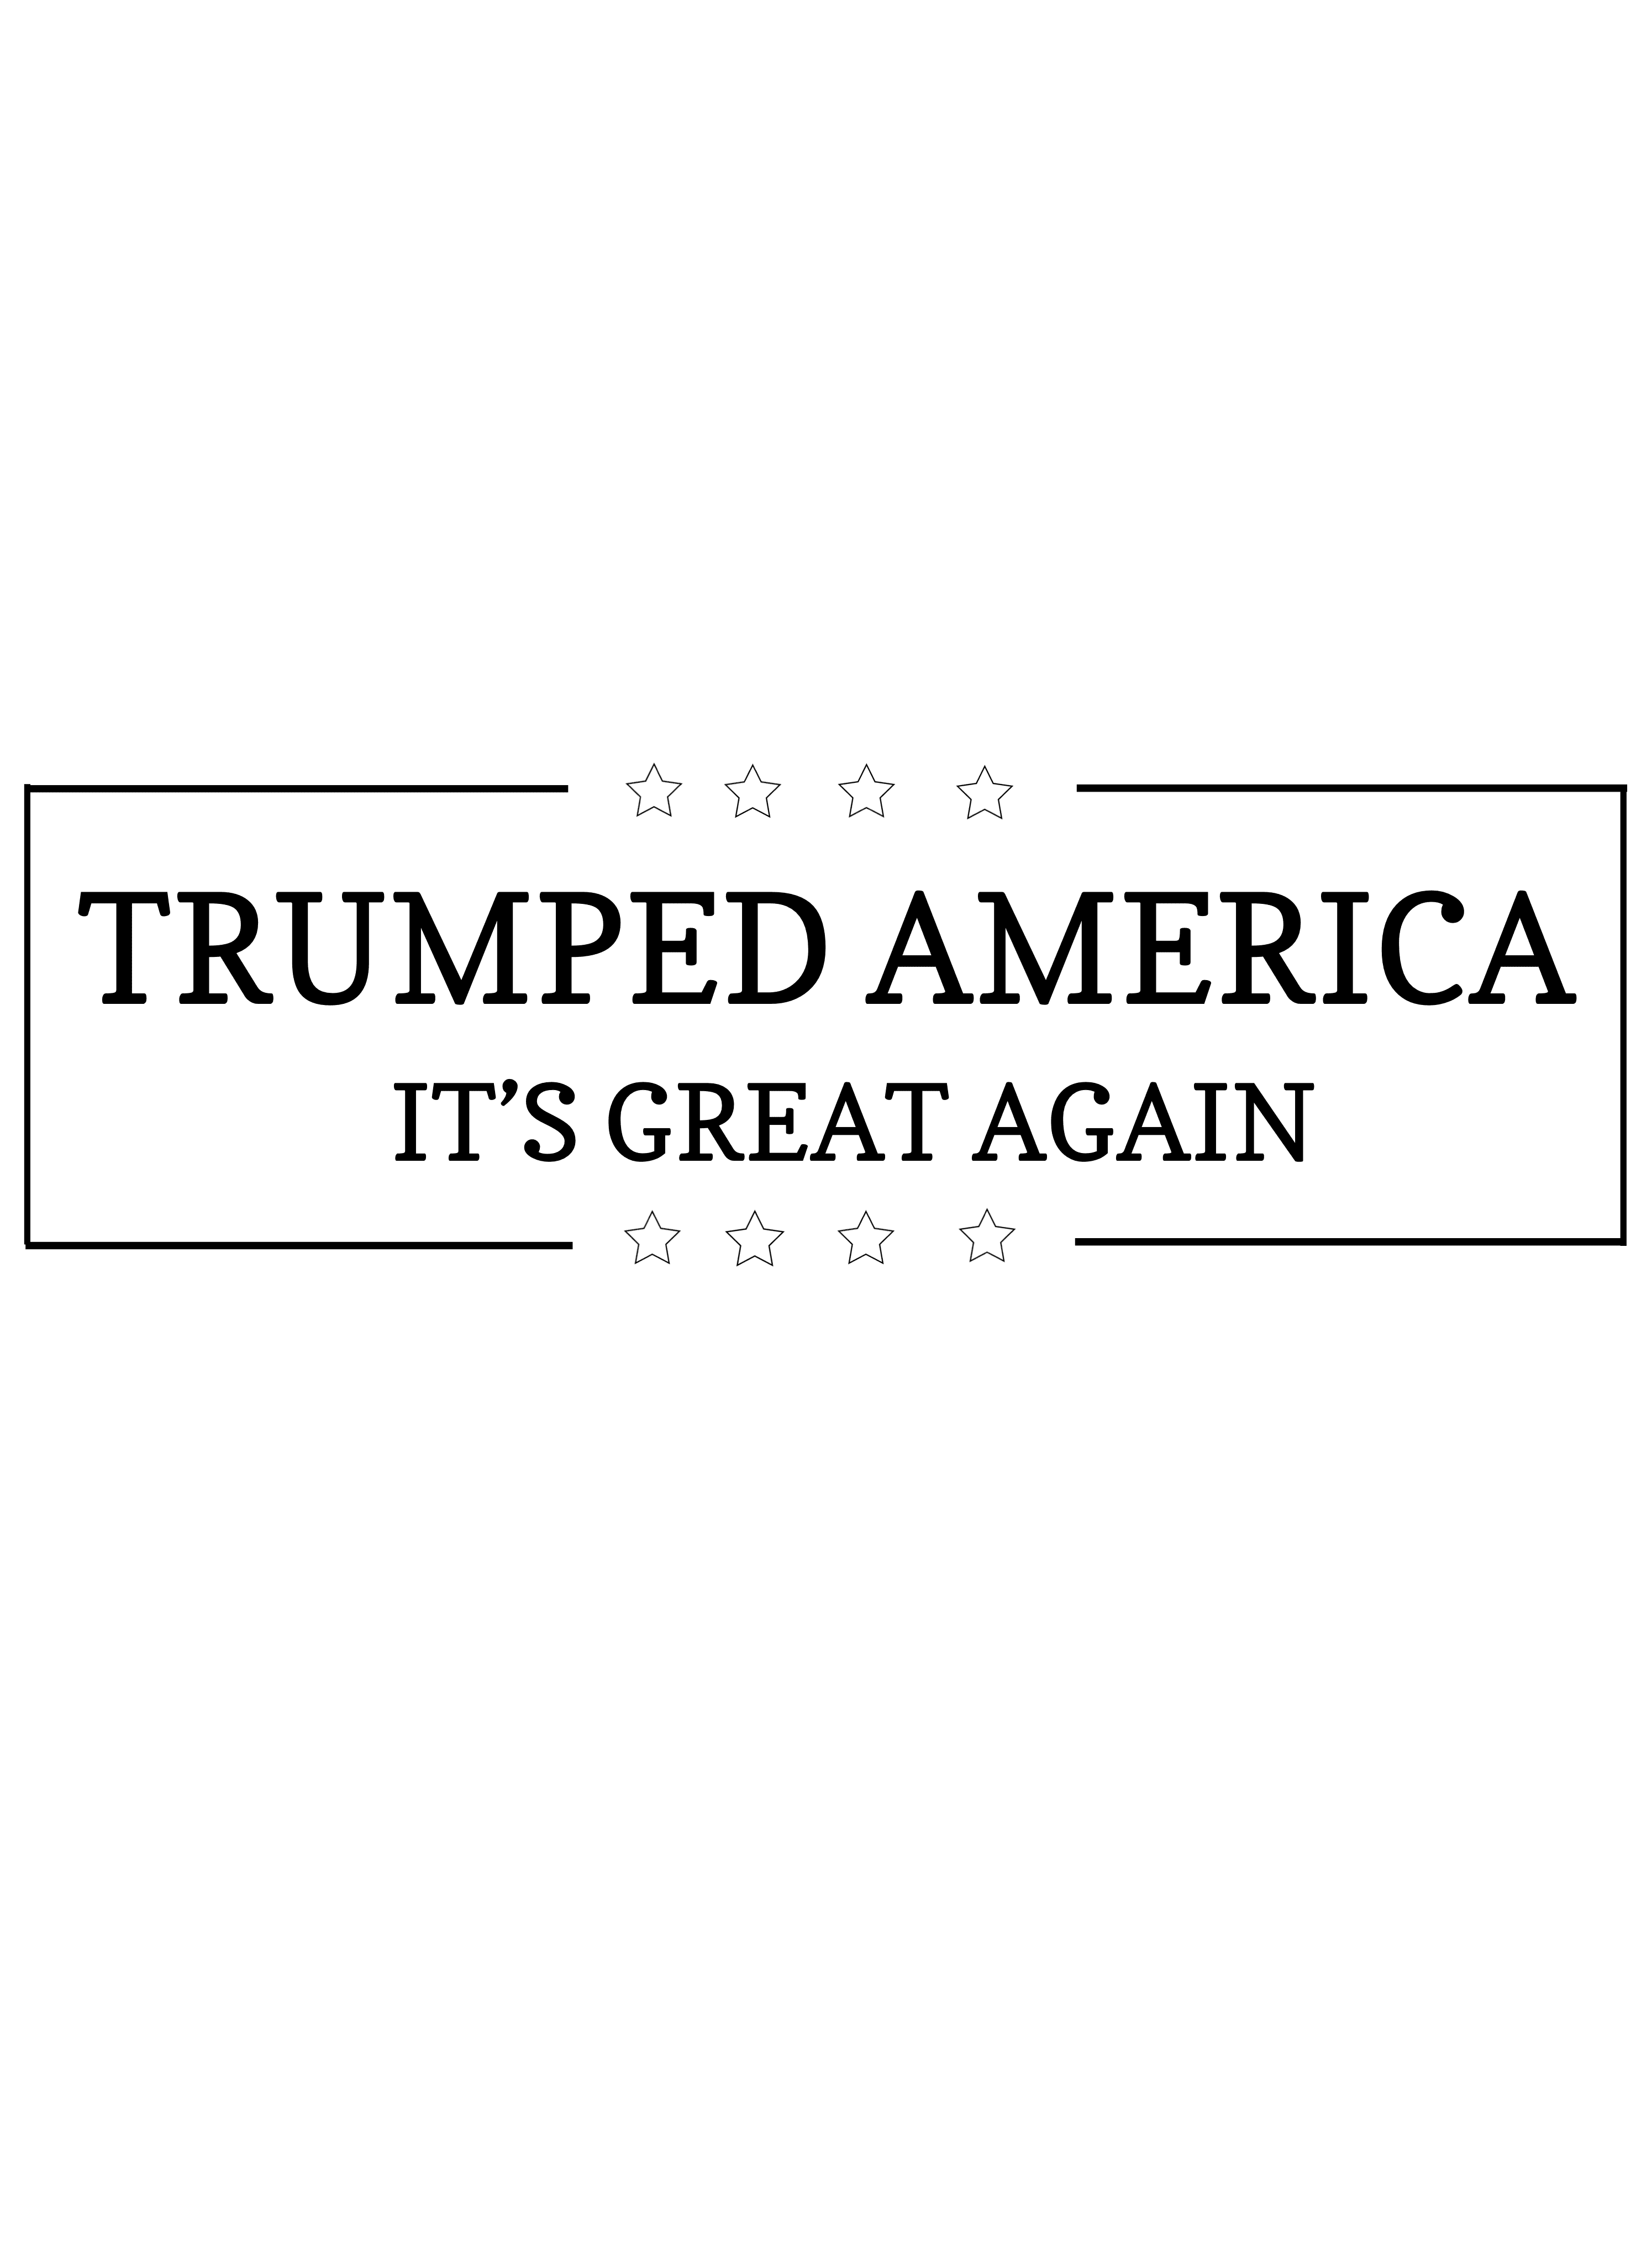 Trumped America store at teespring.com/stores/trumped-america-store